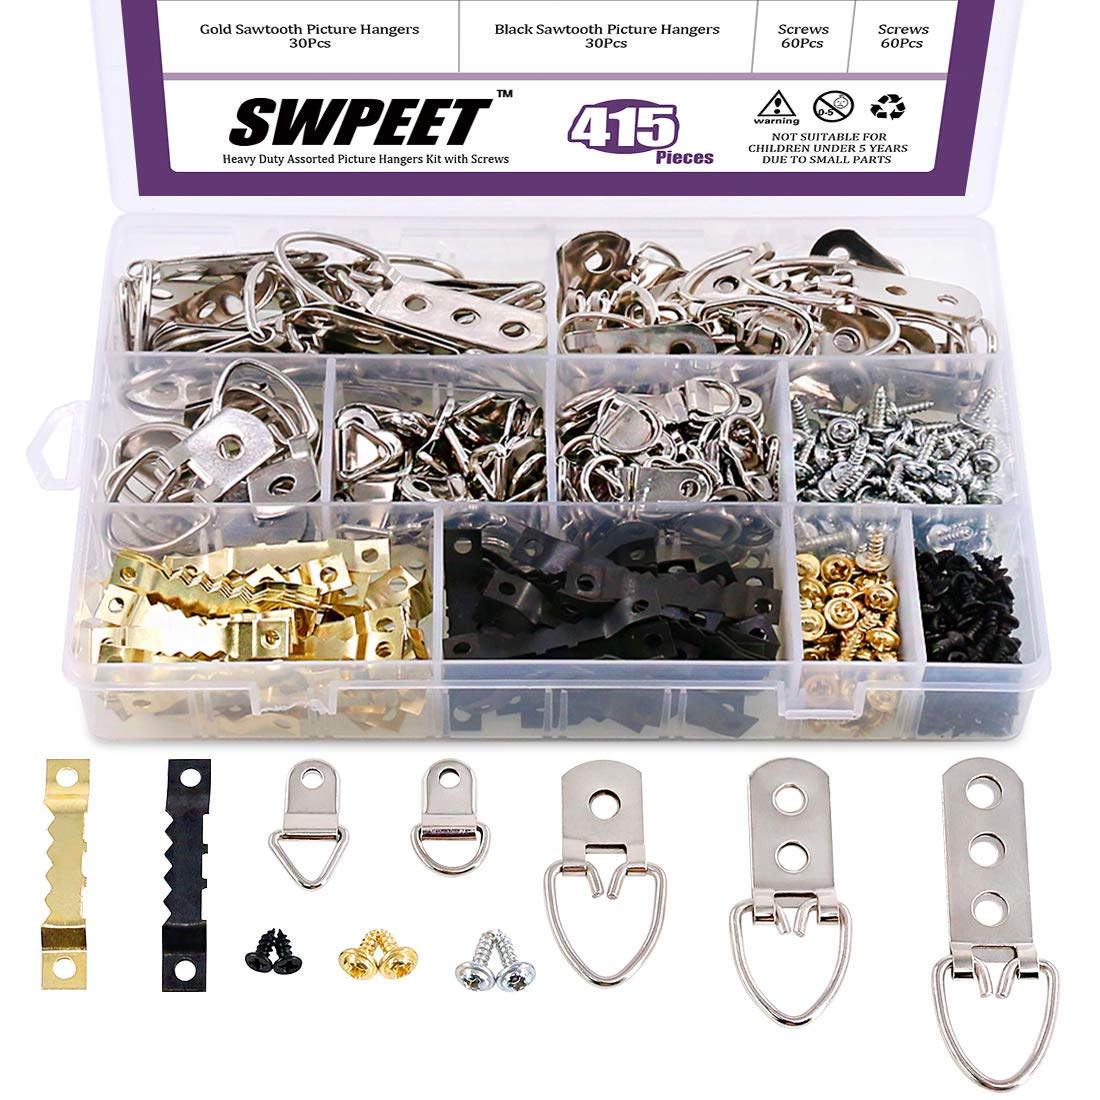 Swpeet 415Pcs Picture Hangers Kit with Screws, Heavy Duty Assorted